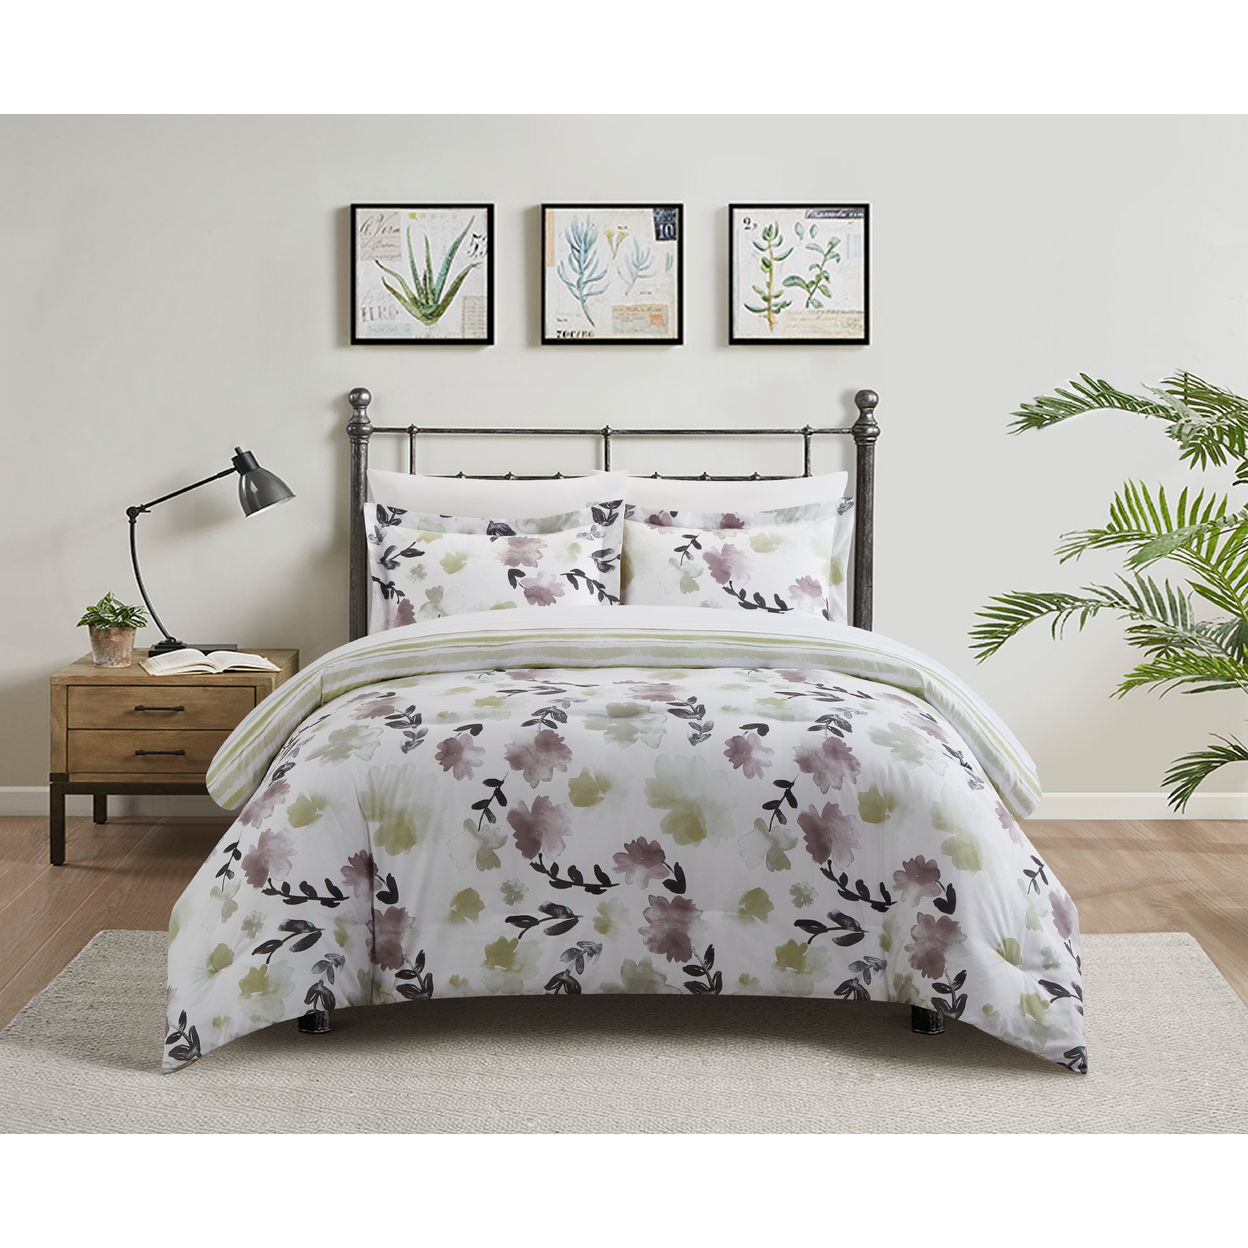 3 Or 2 Piece Duvet Cover Set Print Design With Zipper Closure - Everly Green, King